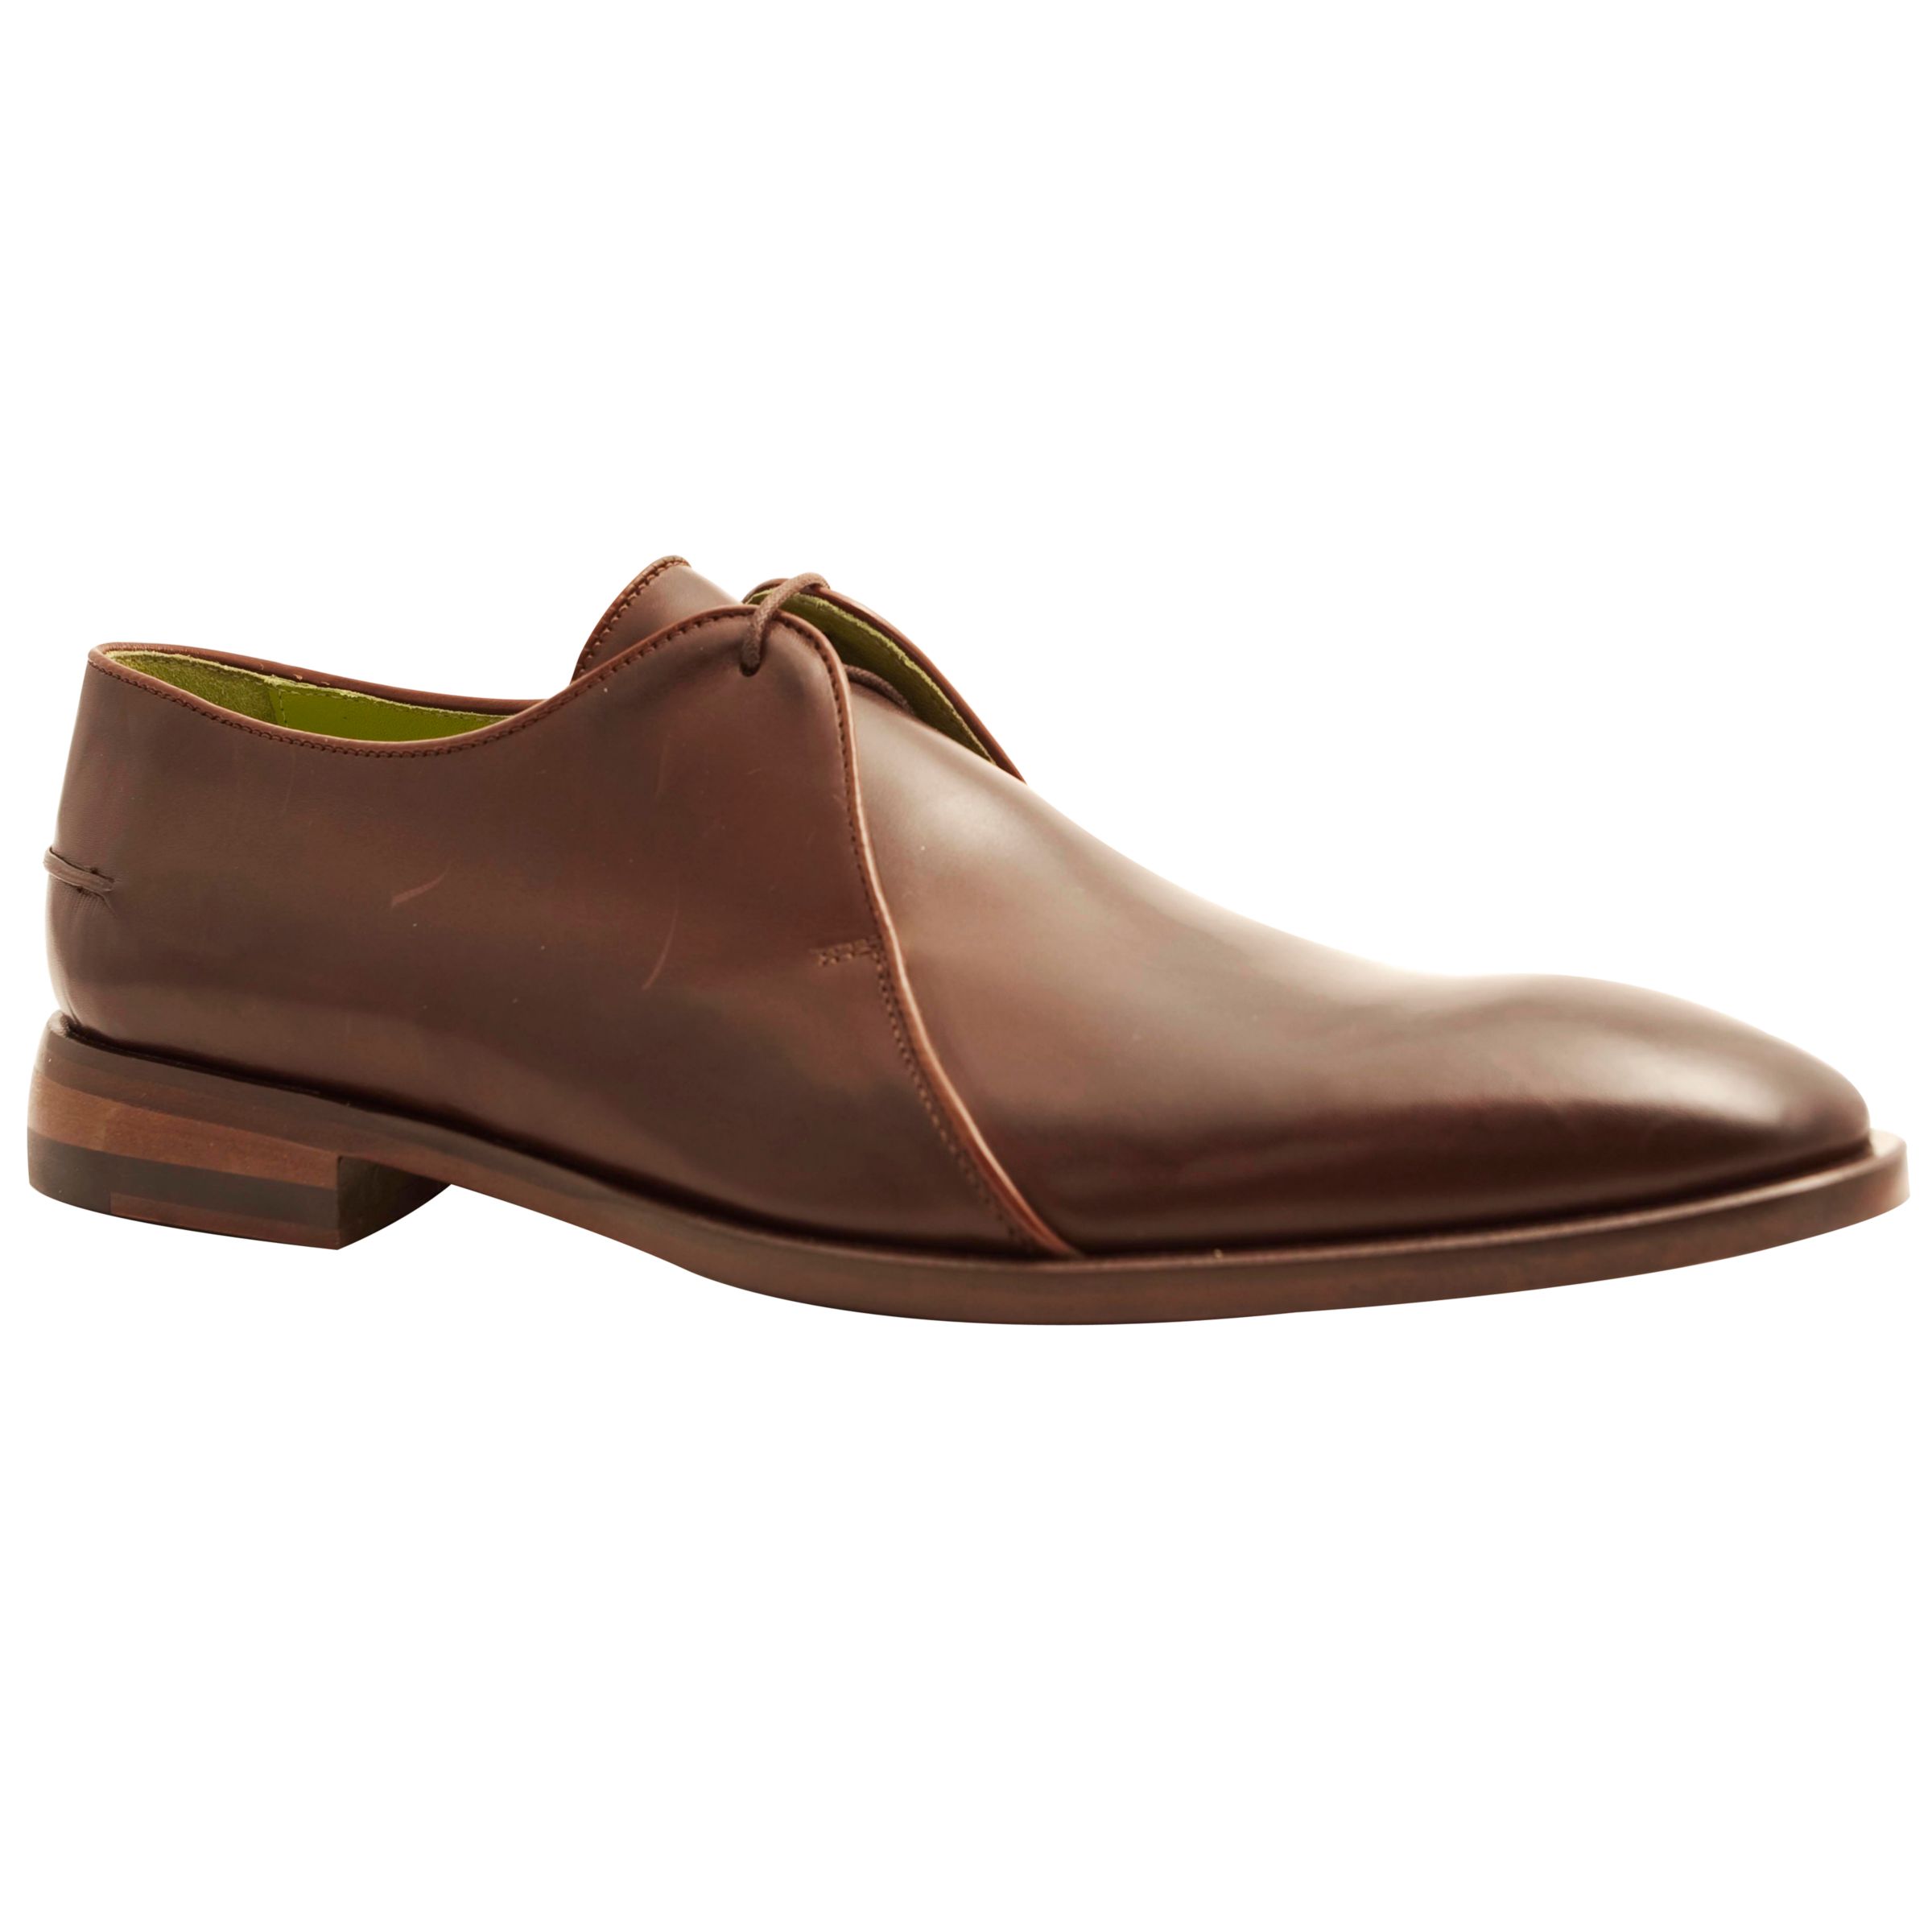 Oliver Sweeney Trissino Leather Derby Shoes, Tan at John Lewis